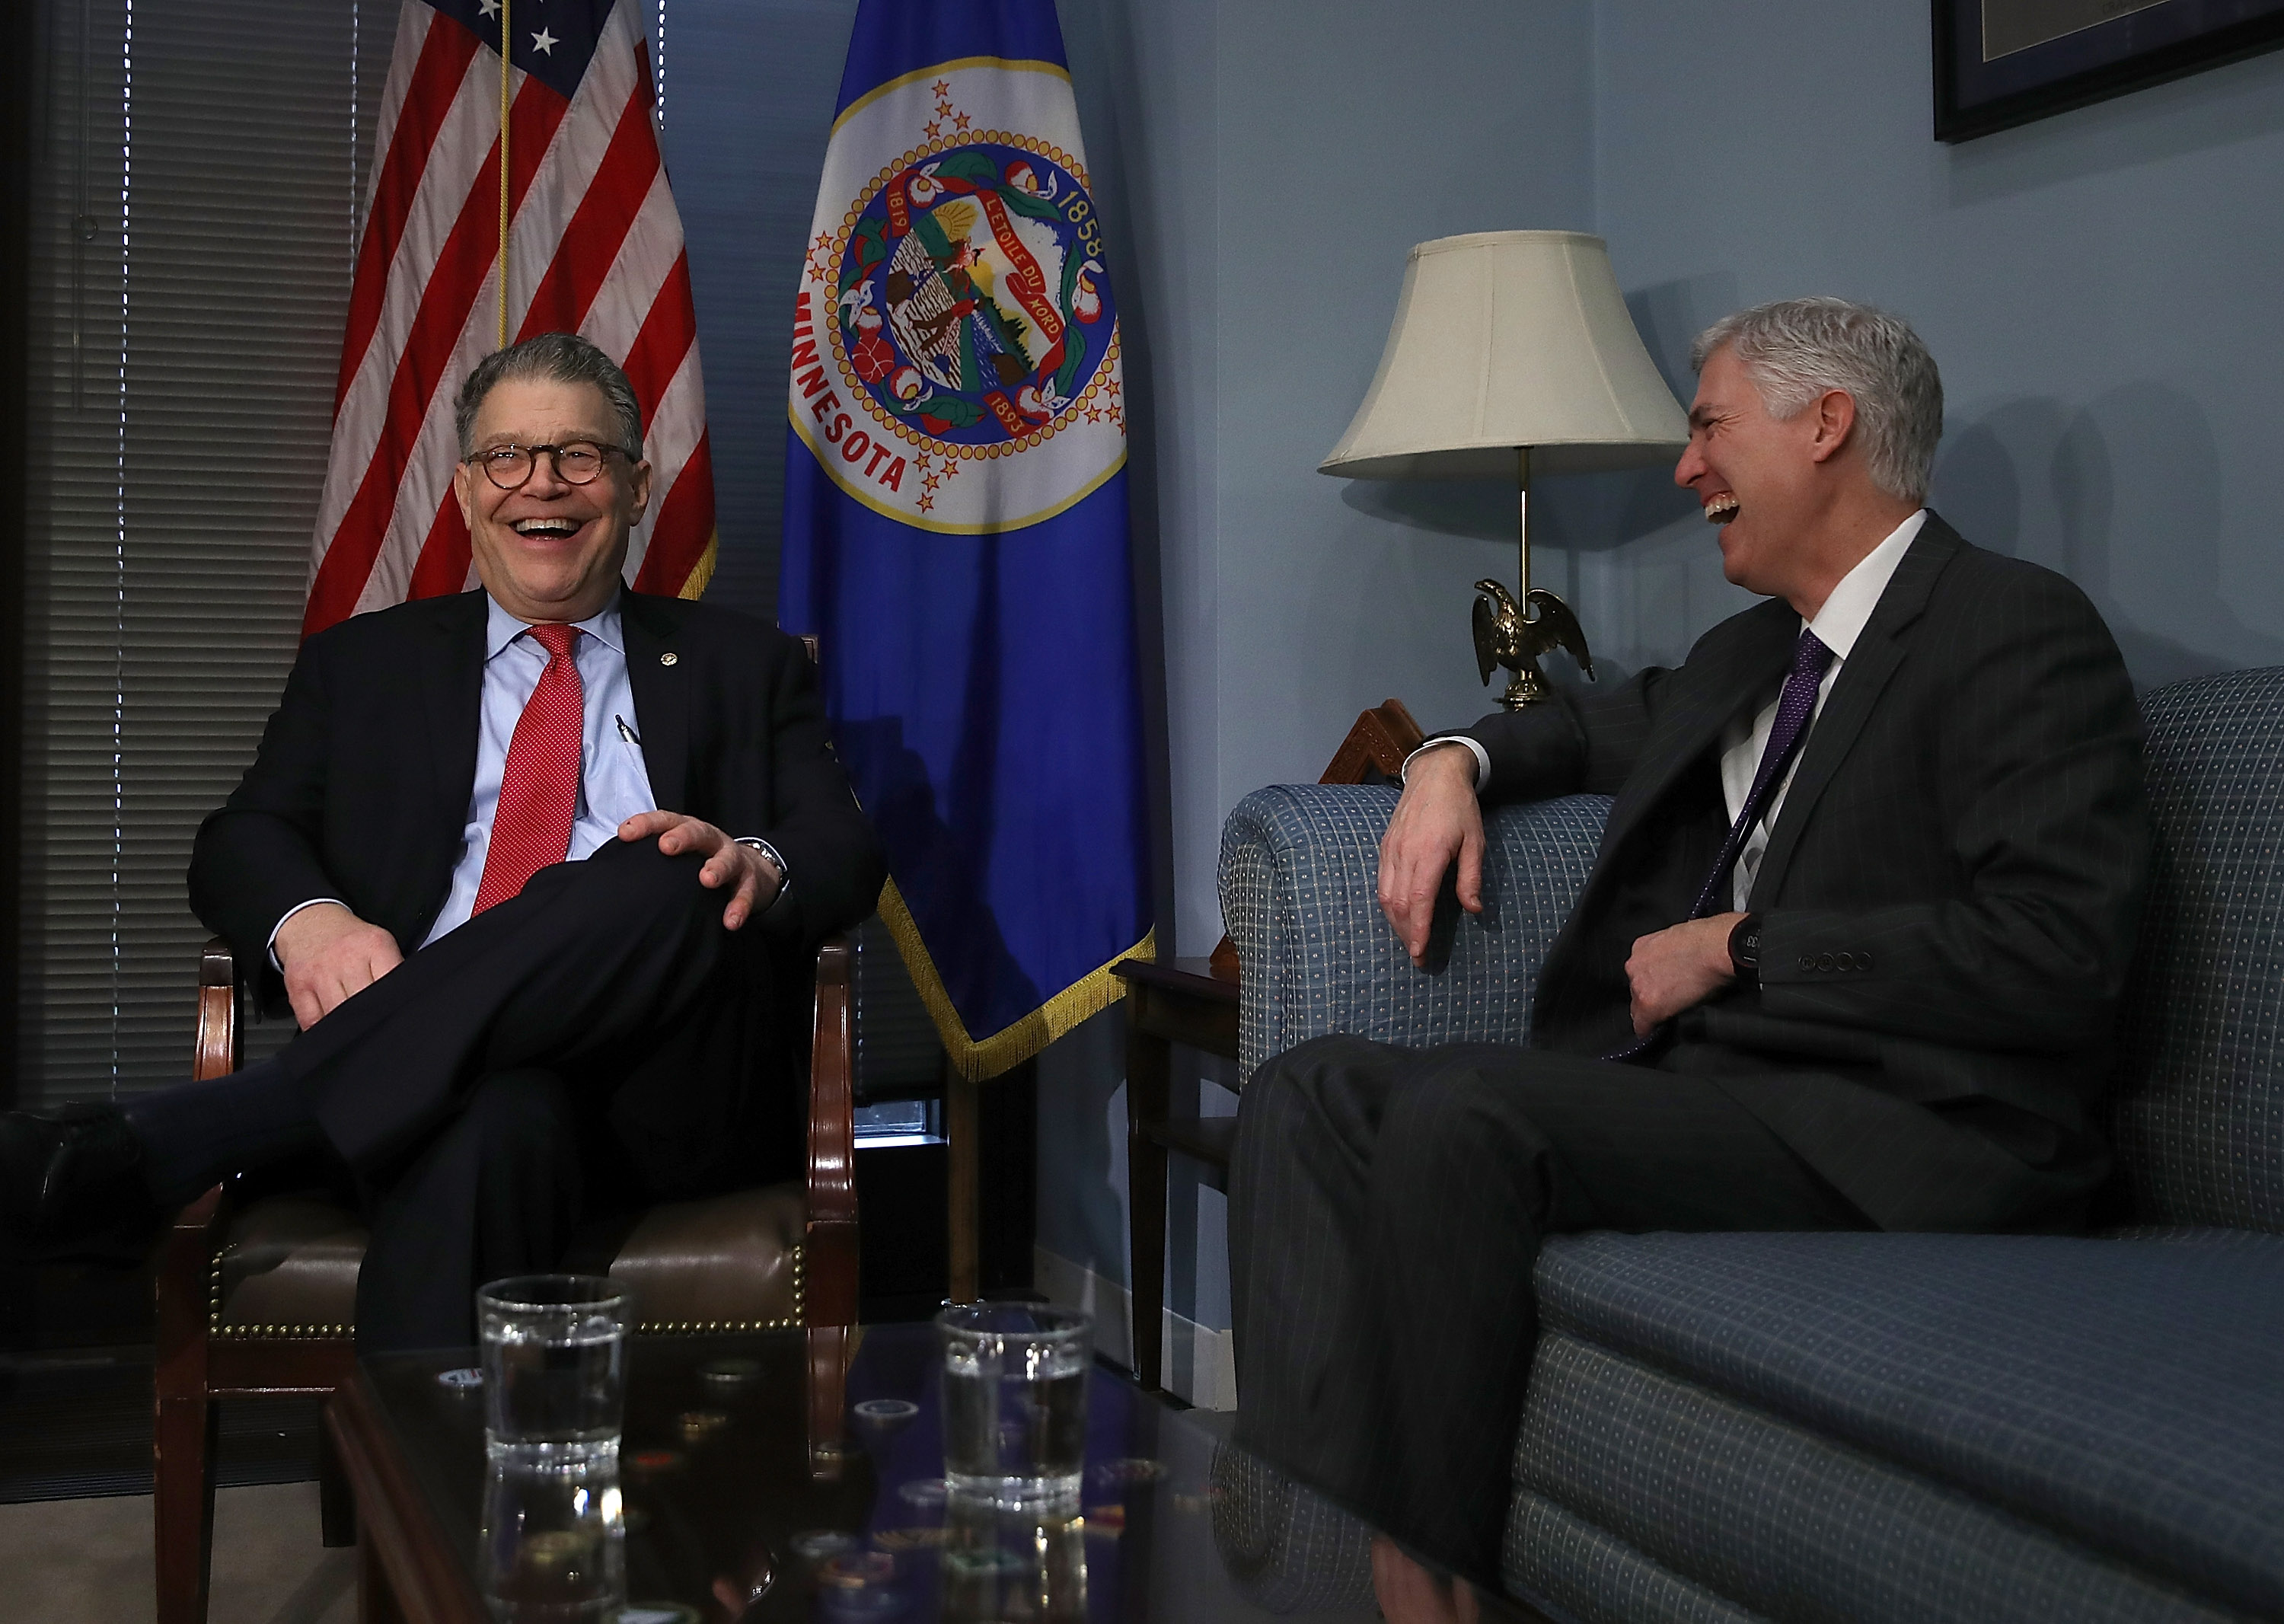 Supreme Court nominee Judge Neil Gorsuch (R) meets with U.S. Sen. Al Franken (D-MN) in Franken's office on Capitol Hill March 7. Photo by Justin Sullivan/Getty Images.